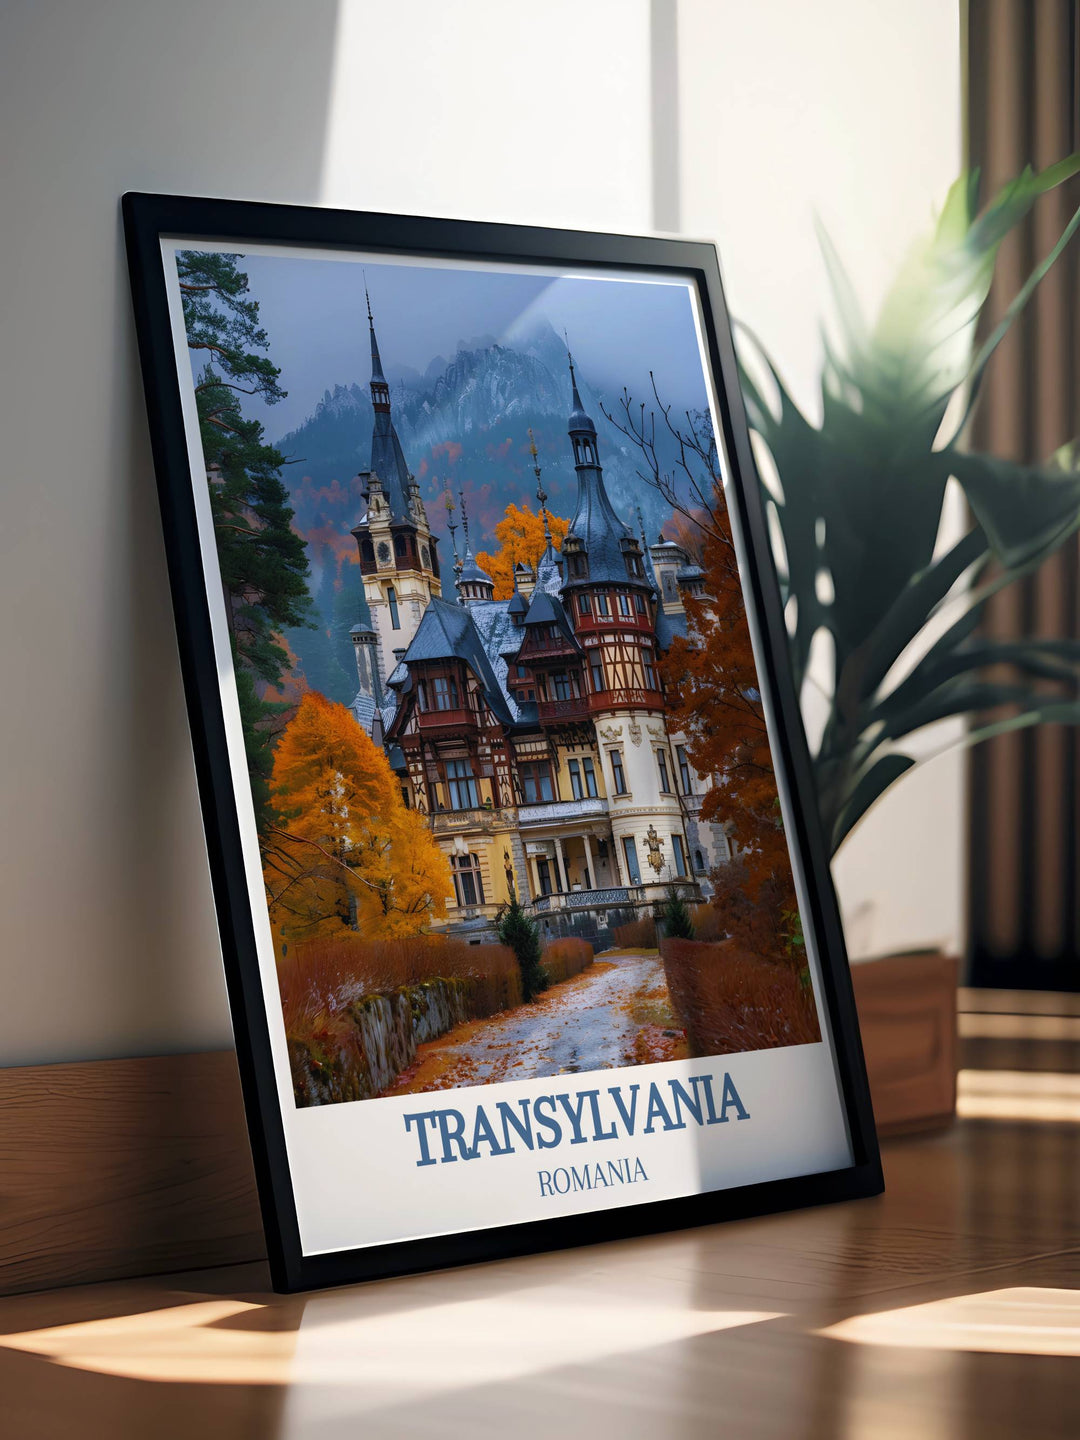 Framed art of Peleș Castle providing a touch of royal elegance to your home or office, with frames crafted to complement the intricate details of this historic Romanian castle.